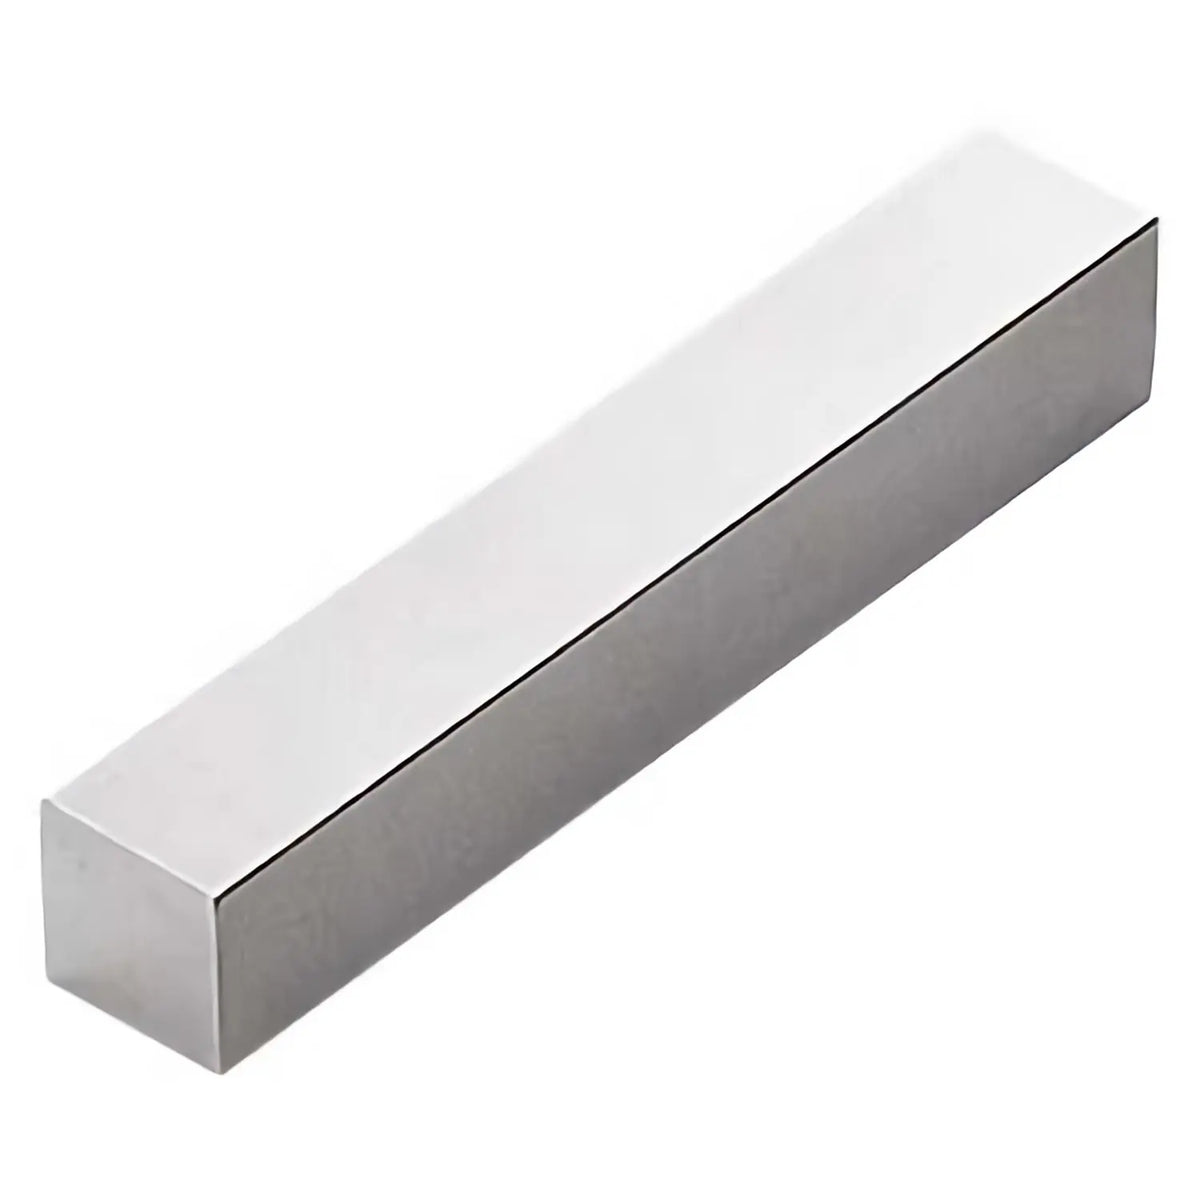 EBM Stainless Steel Chopstick Rest Square